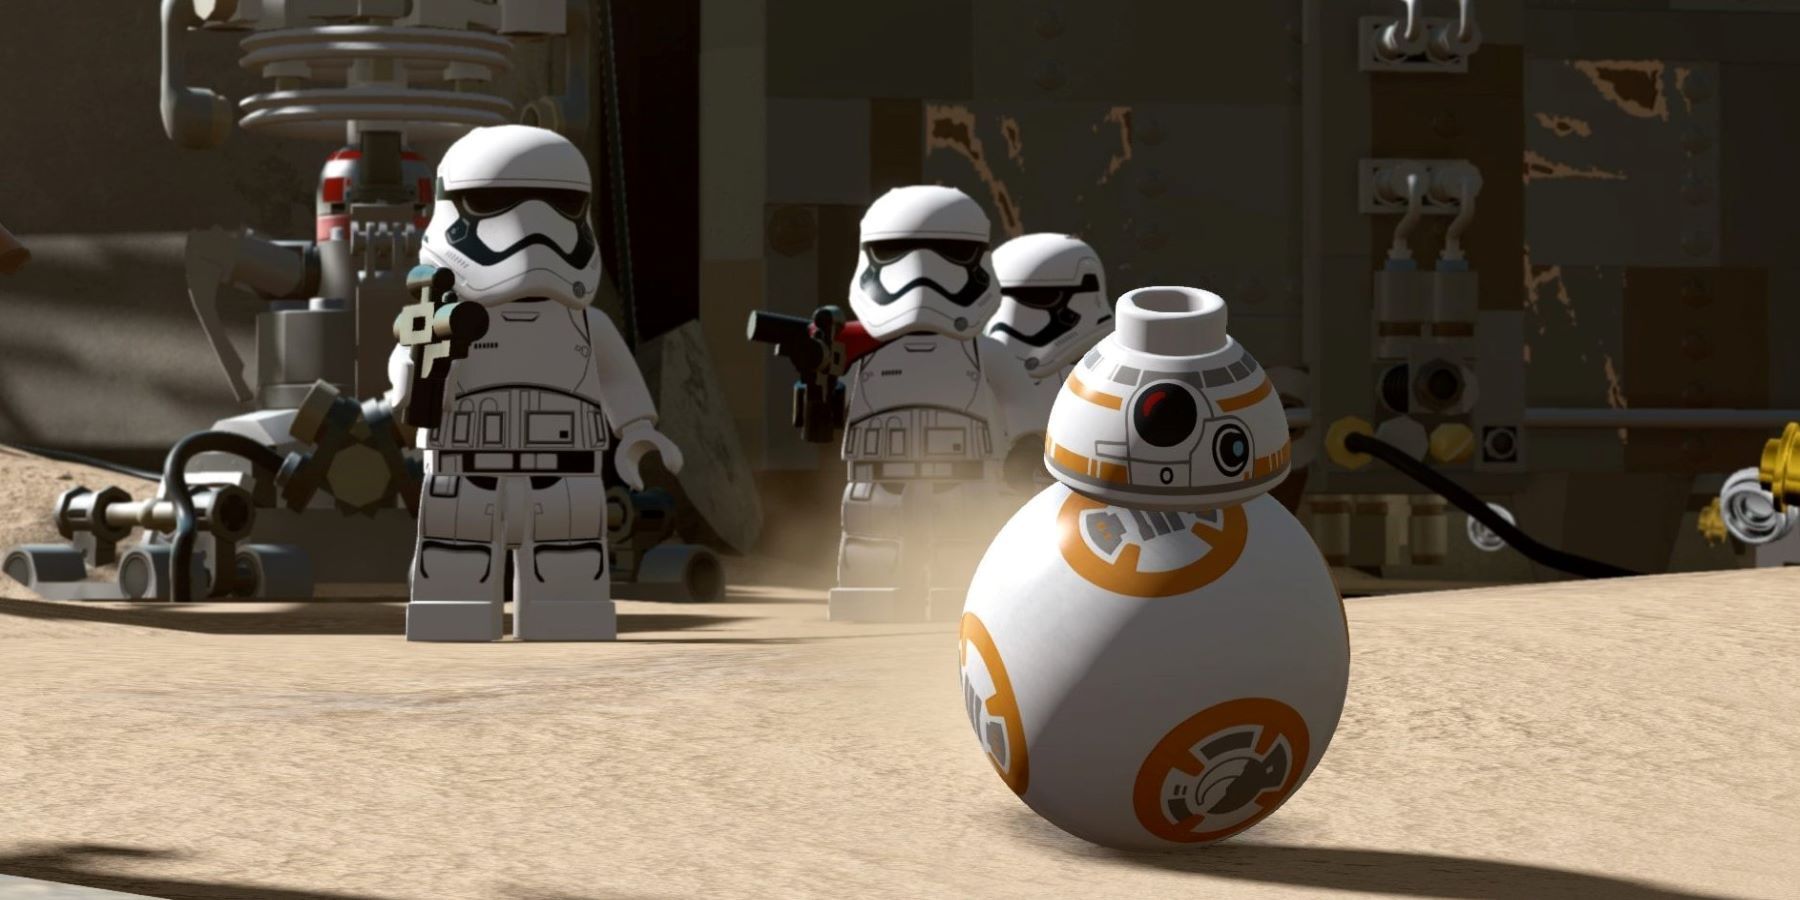 BB-8 on Jakku in front of First Order troopers in LEGO Star Wars: The Force Awakens